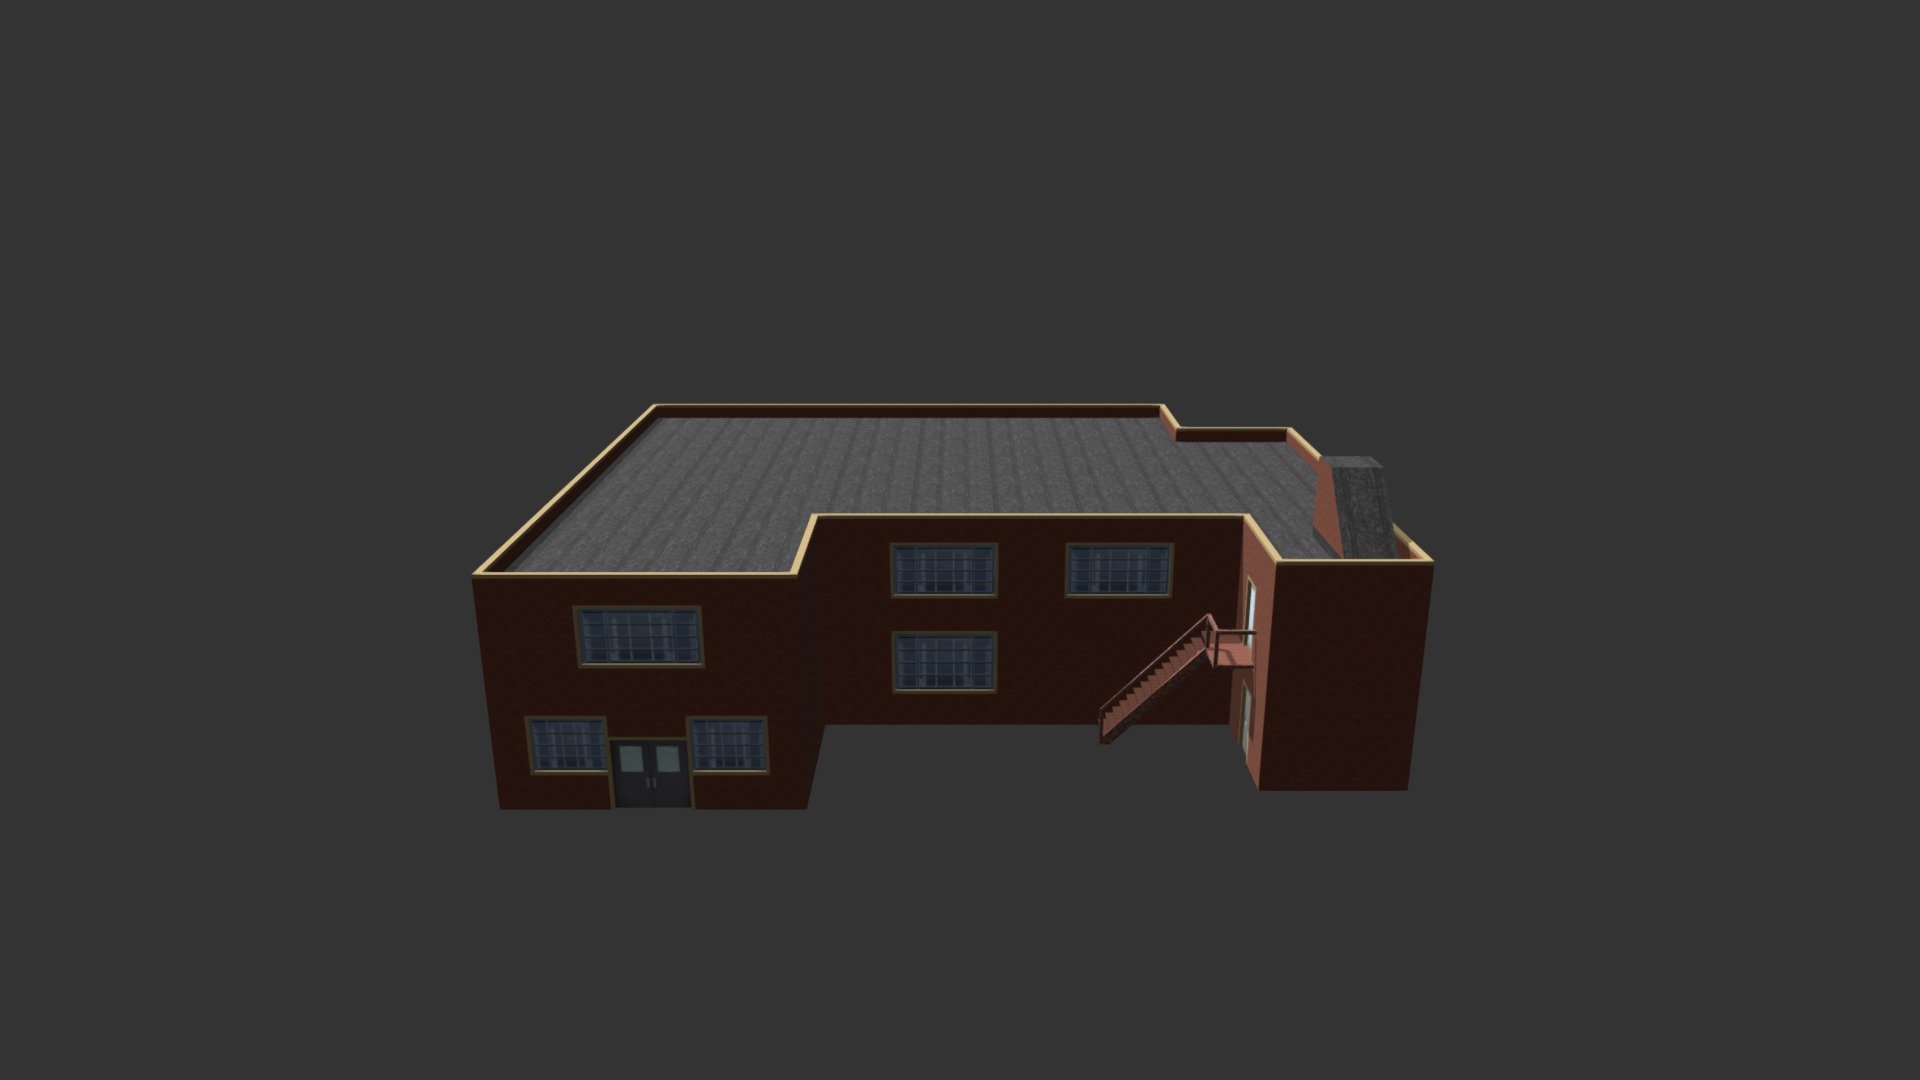 Factory Building 33

A low-poly 3d model ready for Virtual Reality (VR), Augmented Reality (AR), games and other real-time apps.

This model is based on a real life building and uses 1068 triangles (573 polygons) and 6 materials.

Scaled to a default scale of 1 unit = 1 meter

This set comes with :

Model files in 3DS format files (.3ds) 
Model files in FBX format files (.fbx) 
Model files in OBJ format files (.obj &amp; .mtl) 

Textures : 
Diffuse Maps 
Normal Maps

All Textures are preloaded on the materials and prefabs so this prop is ready to be dropped in to any of your scenes.

Optimised for game engines but can also be used in any 3d package 3d model